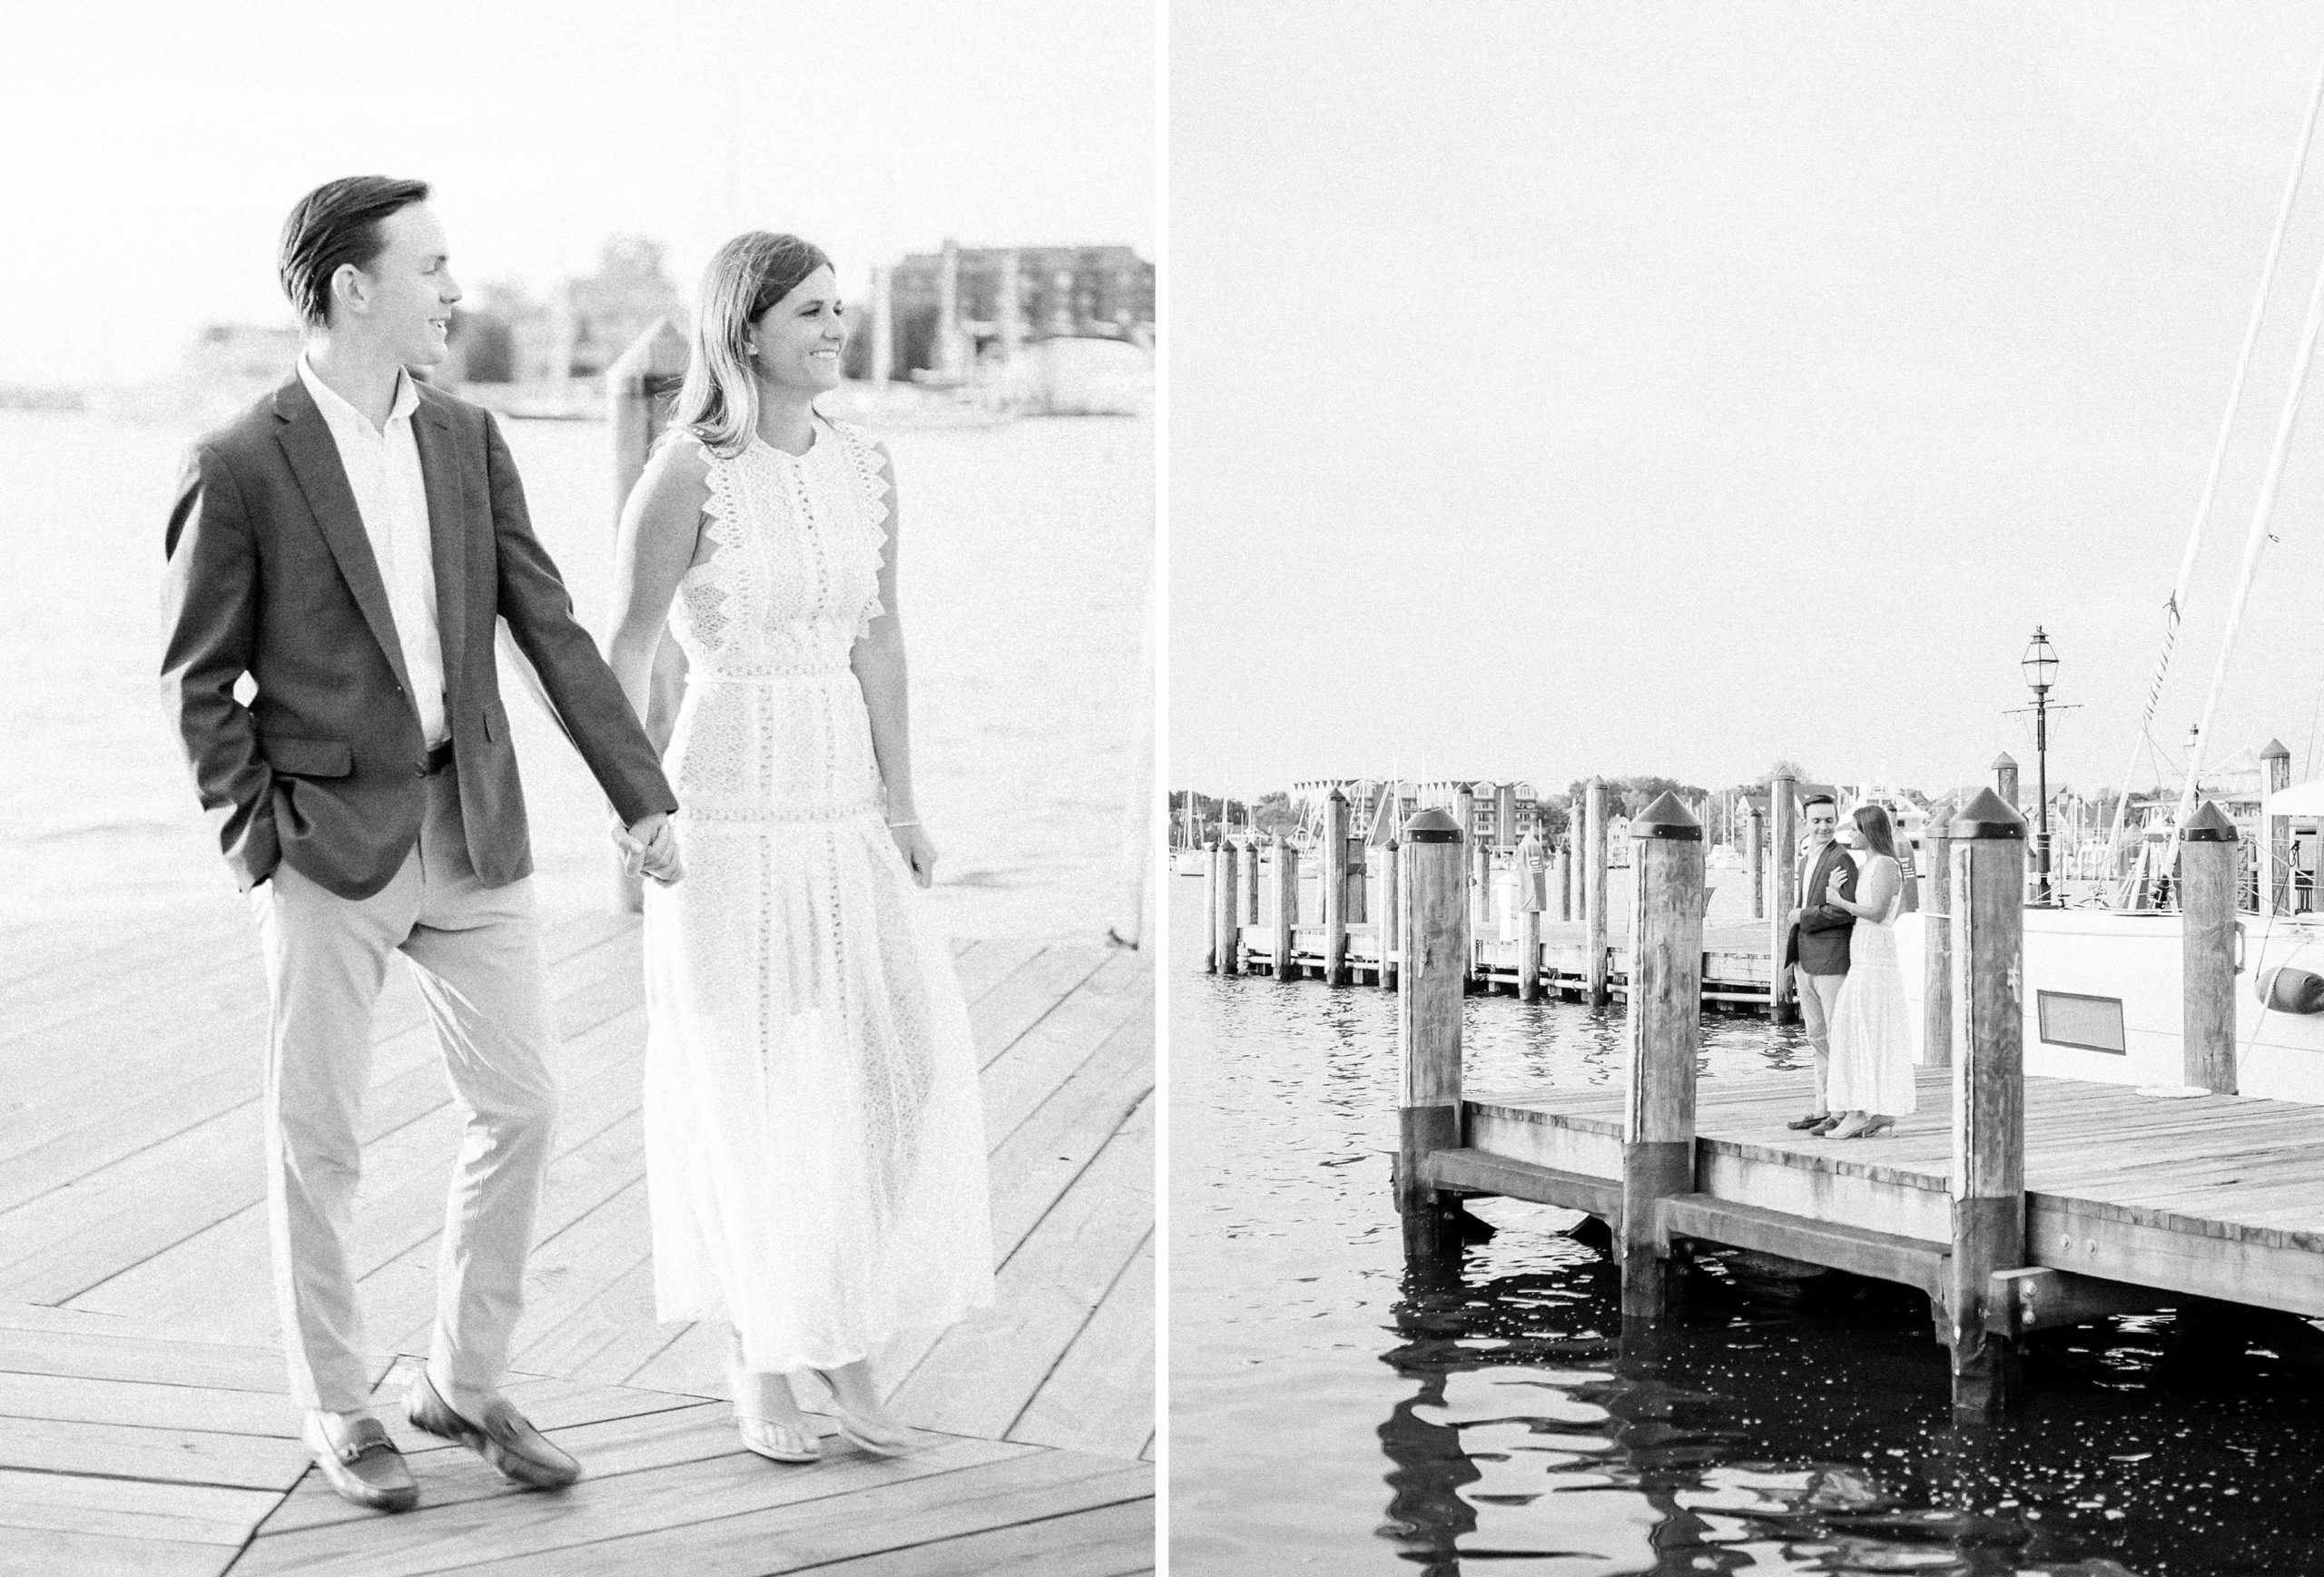 A beautiful fine art film engagement session captured in downtown Annapolis at sunrise by Washington, DC photographer, Alicia Lacey.